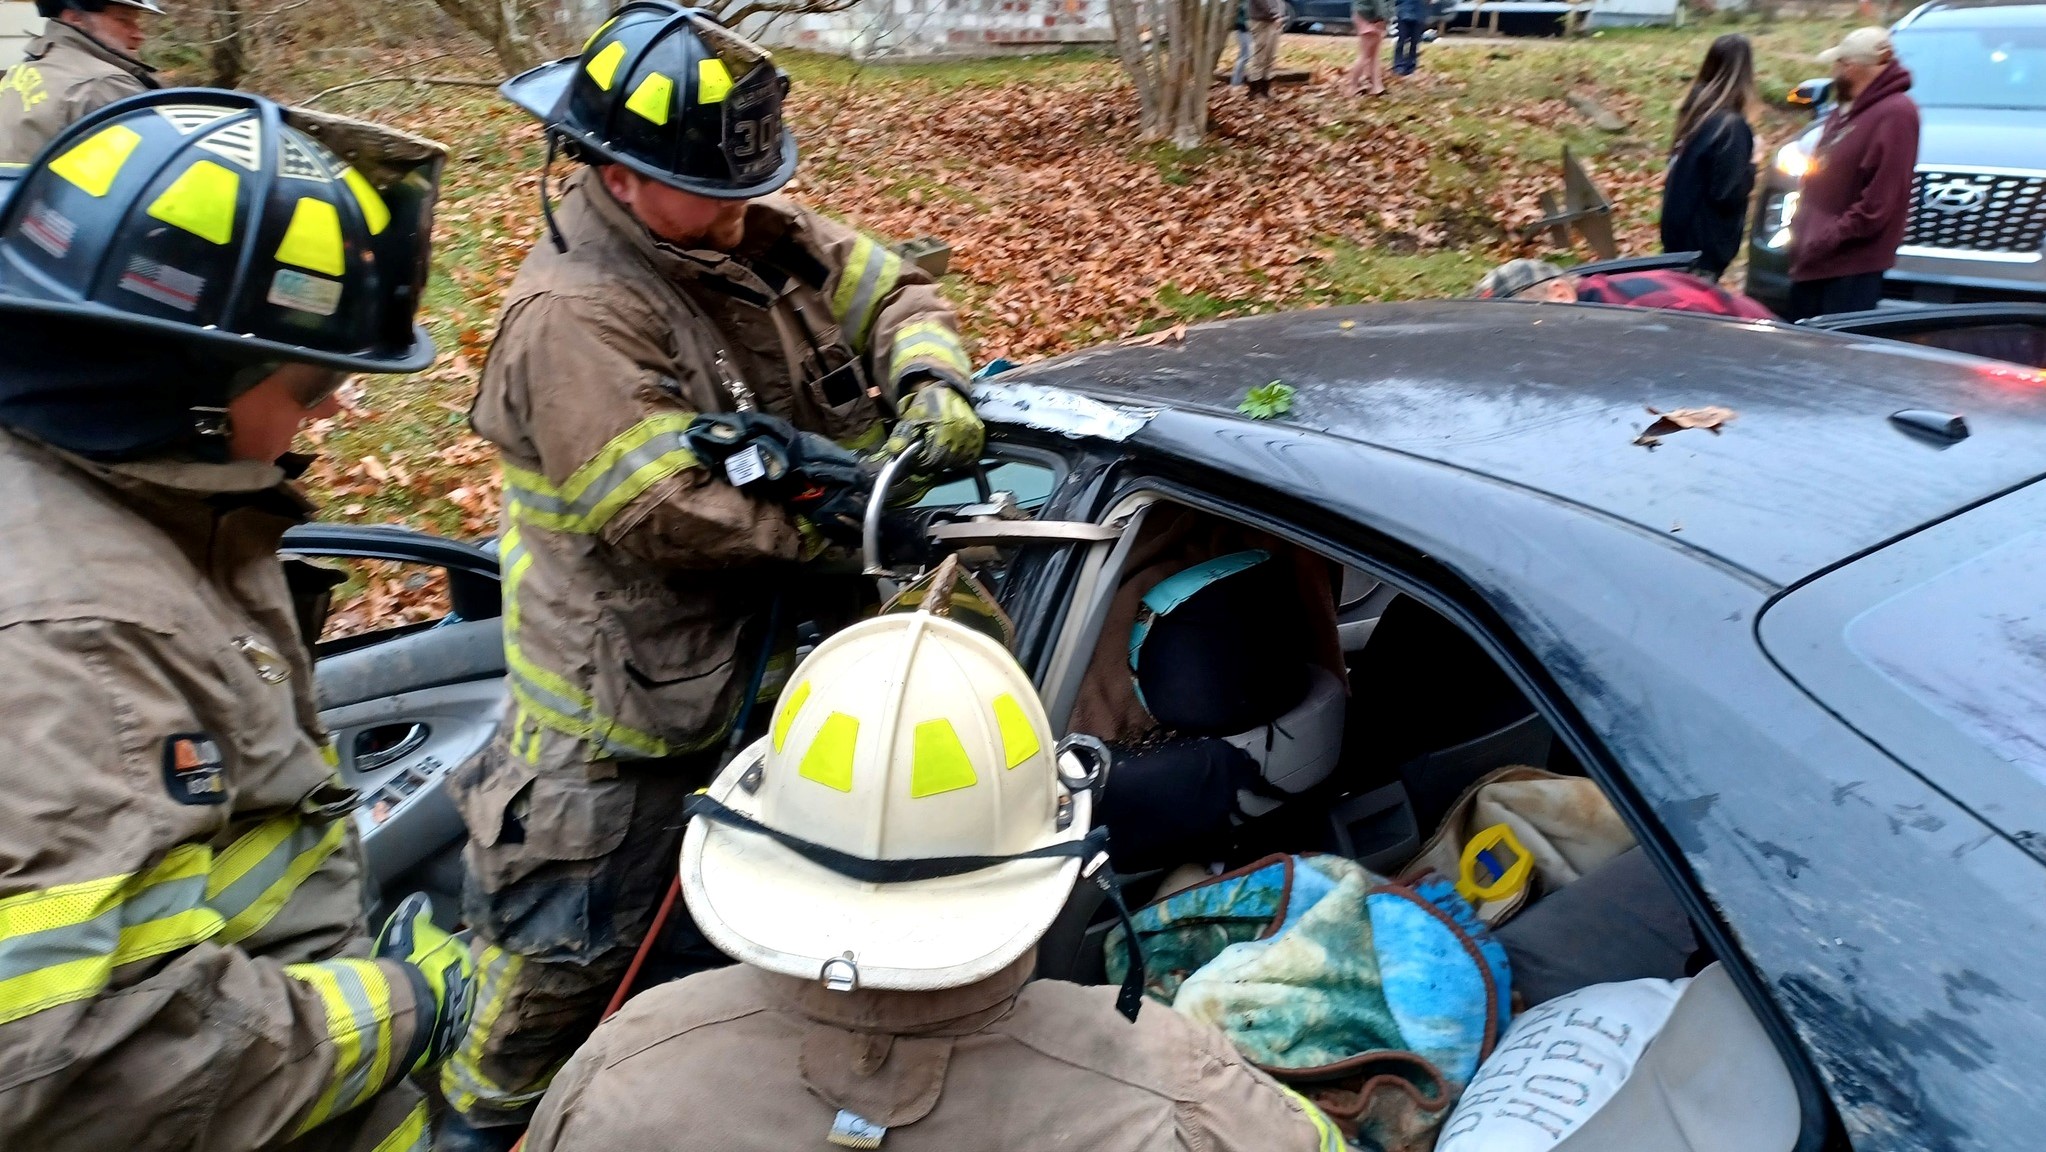 Firefighters rescue pregnant woman involved in crash